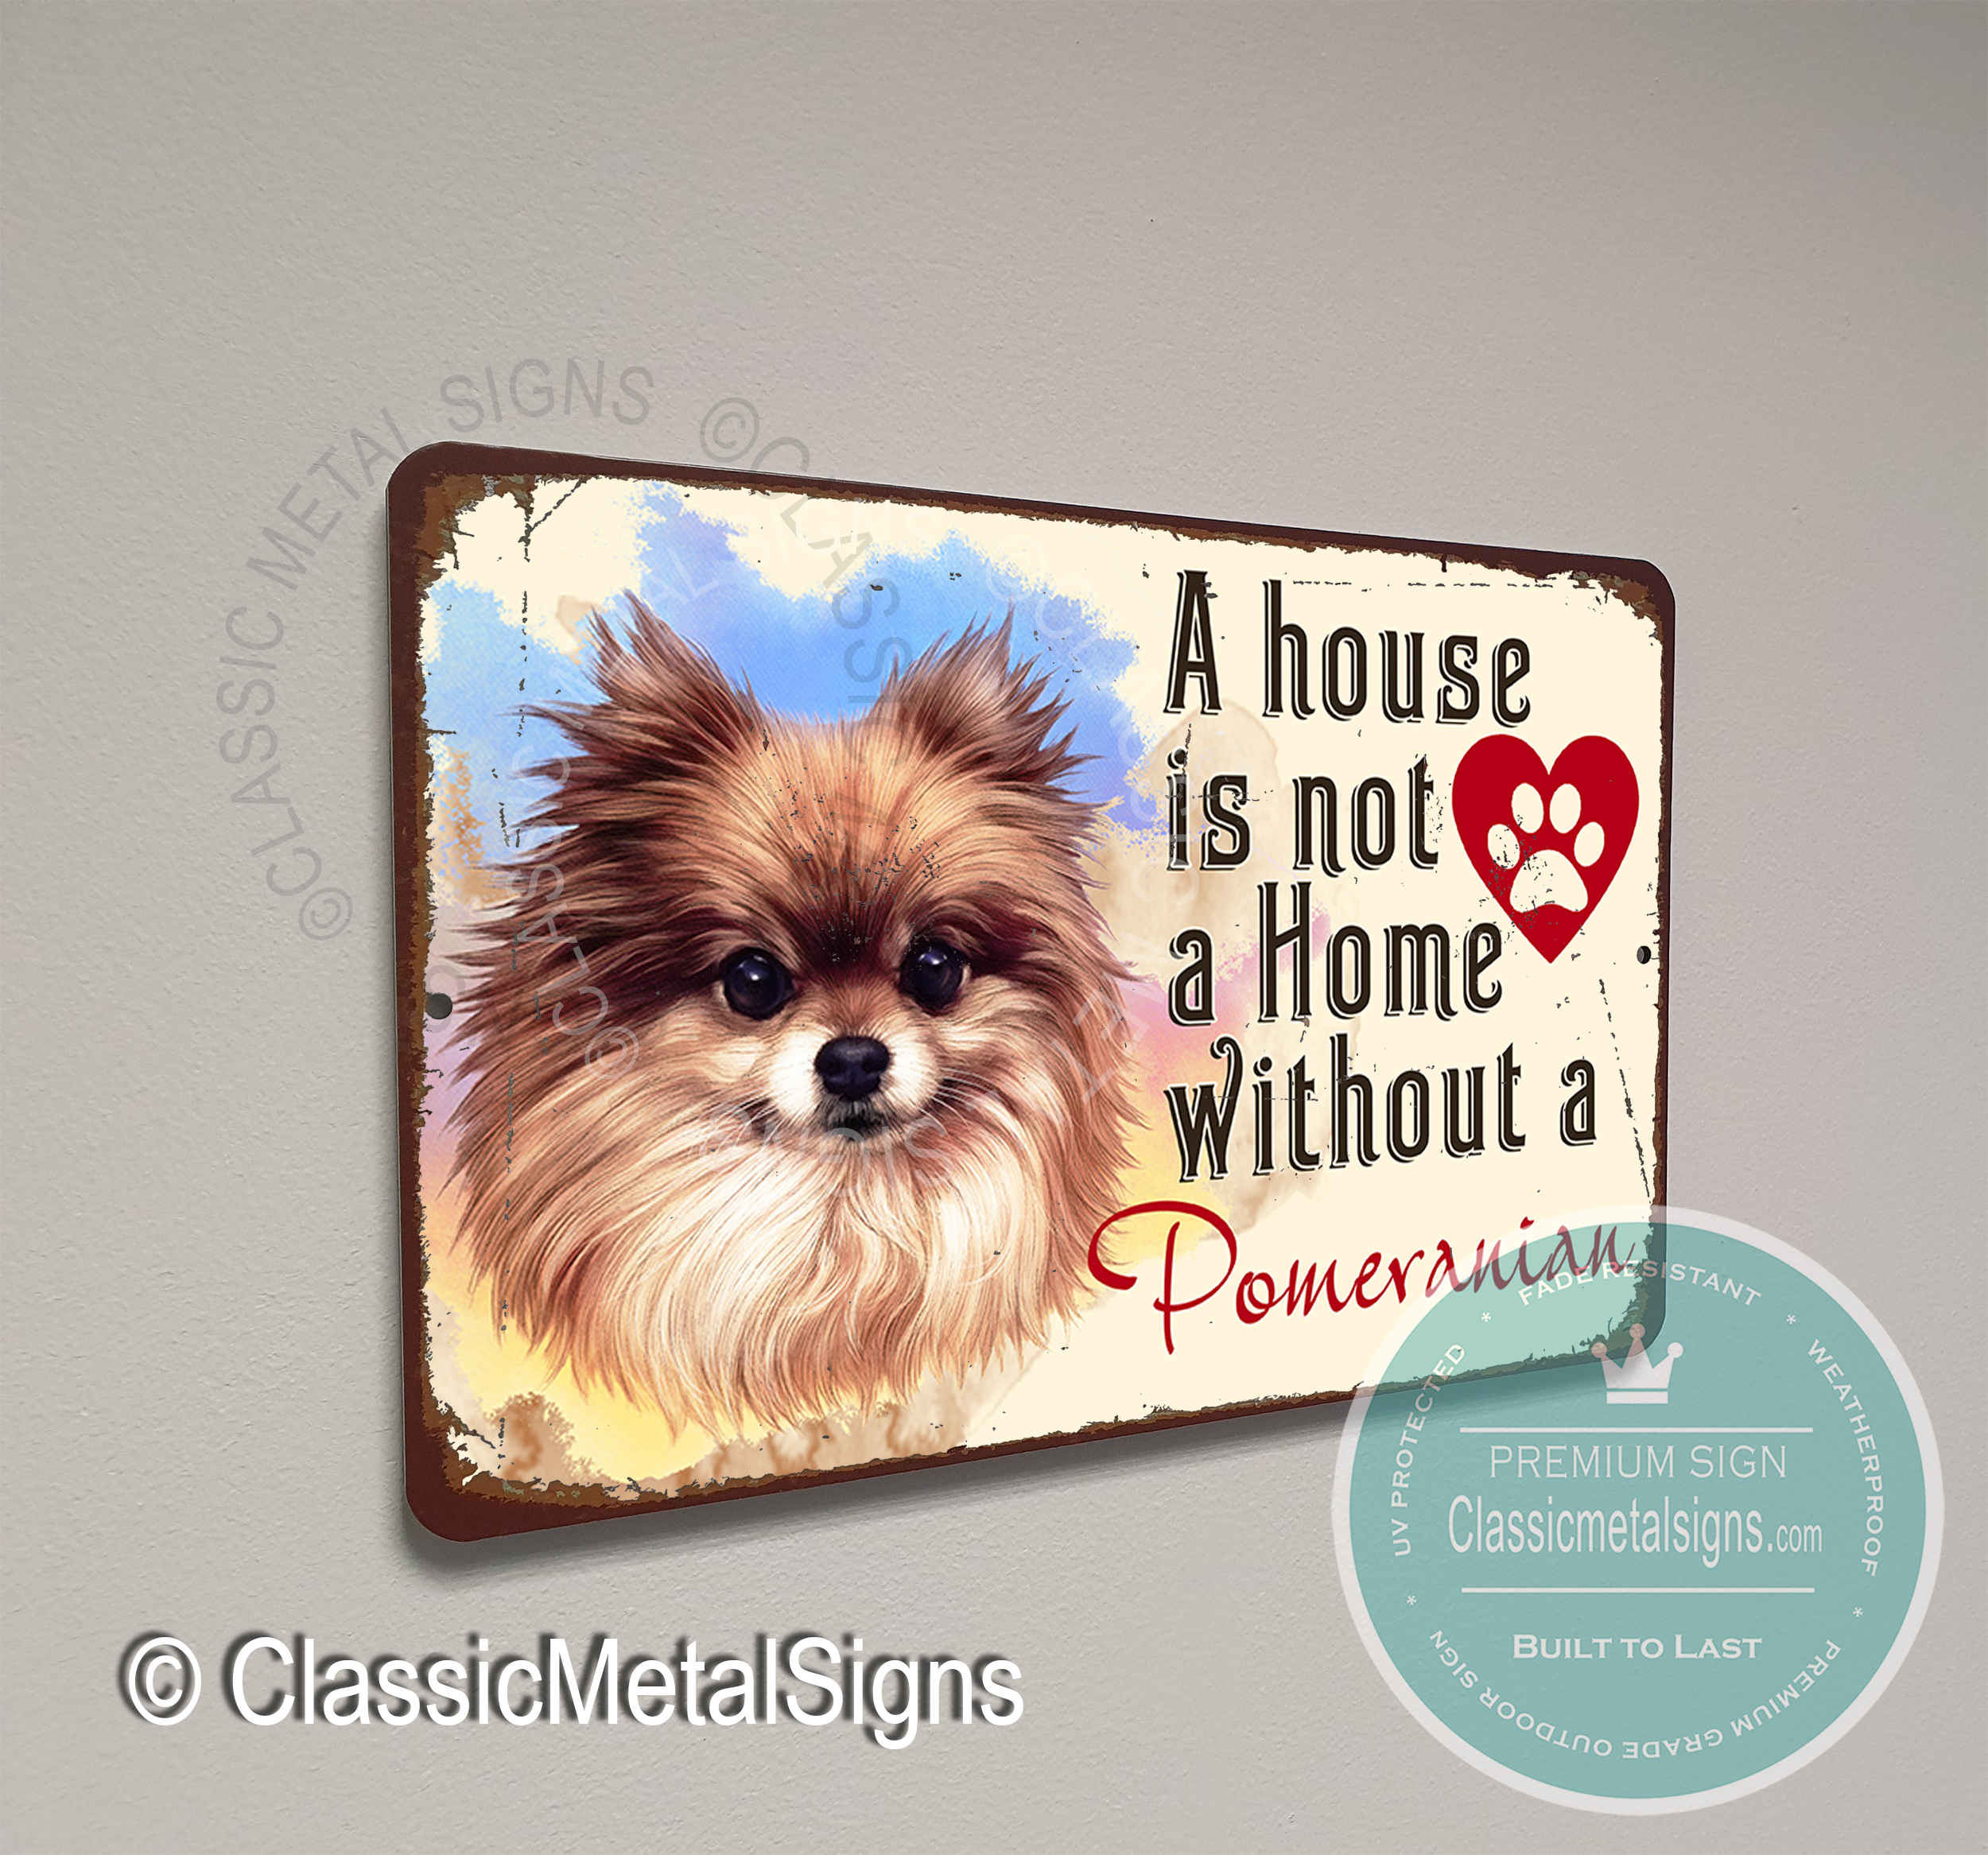 A House is not a home without a Pomeranian Sign